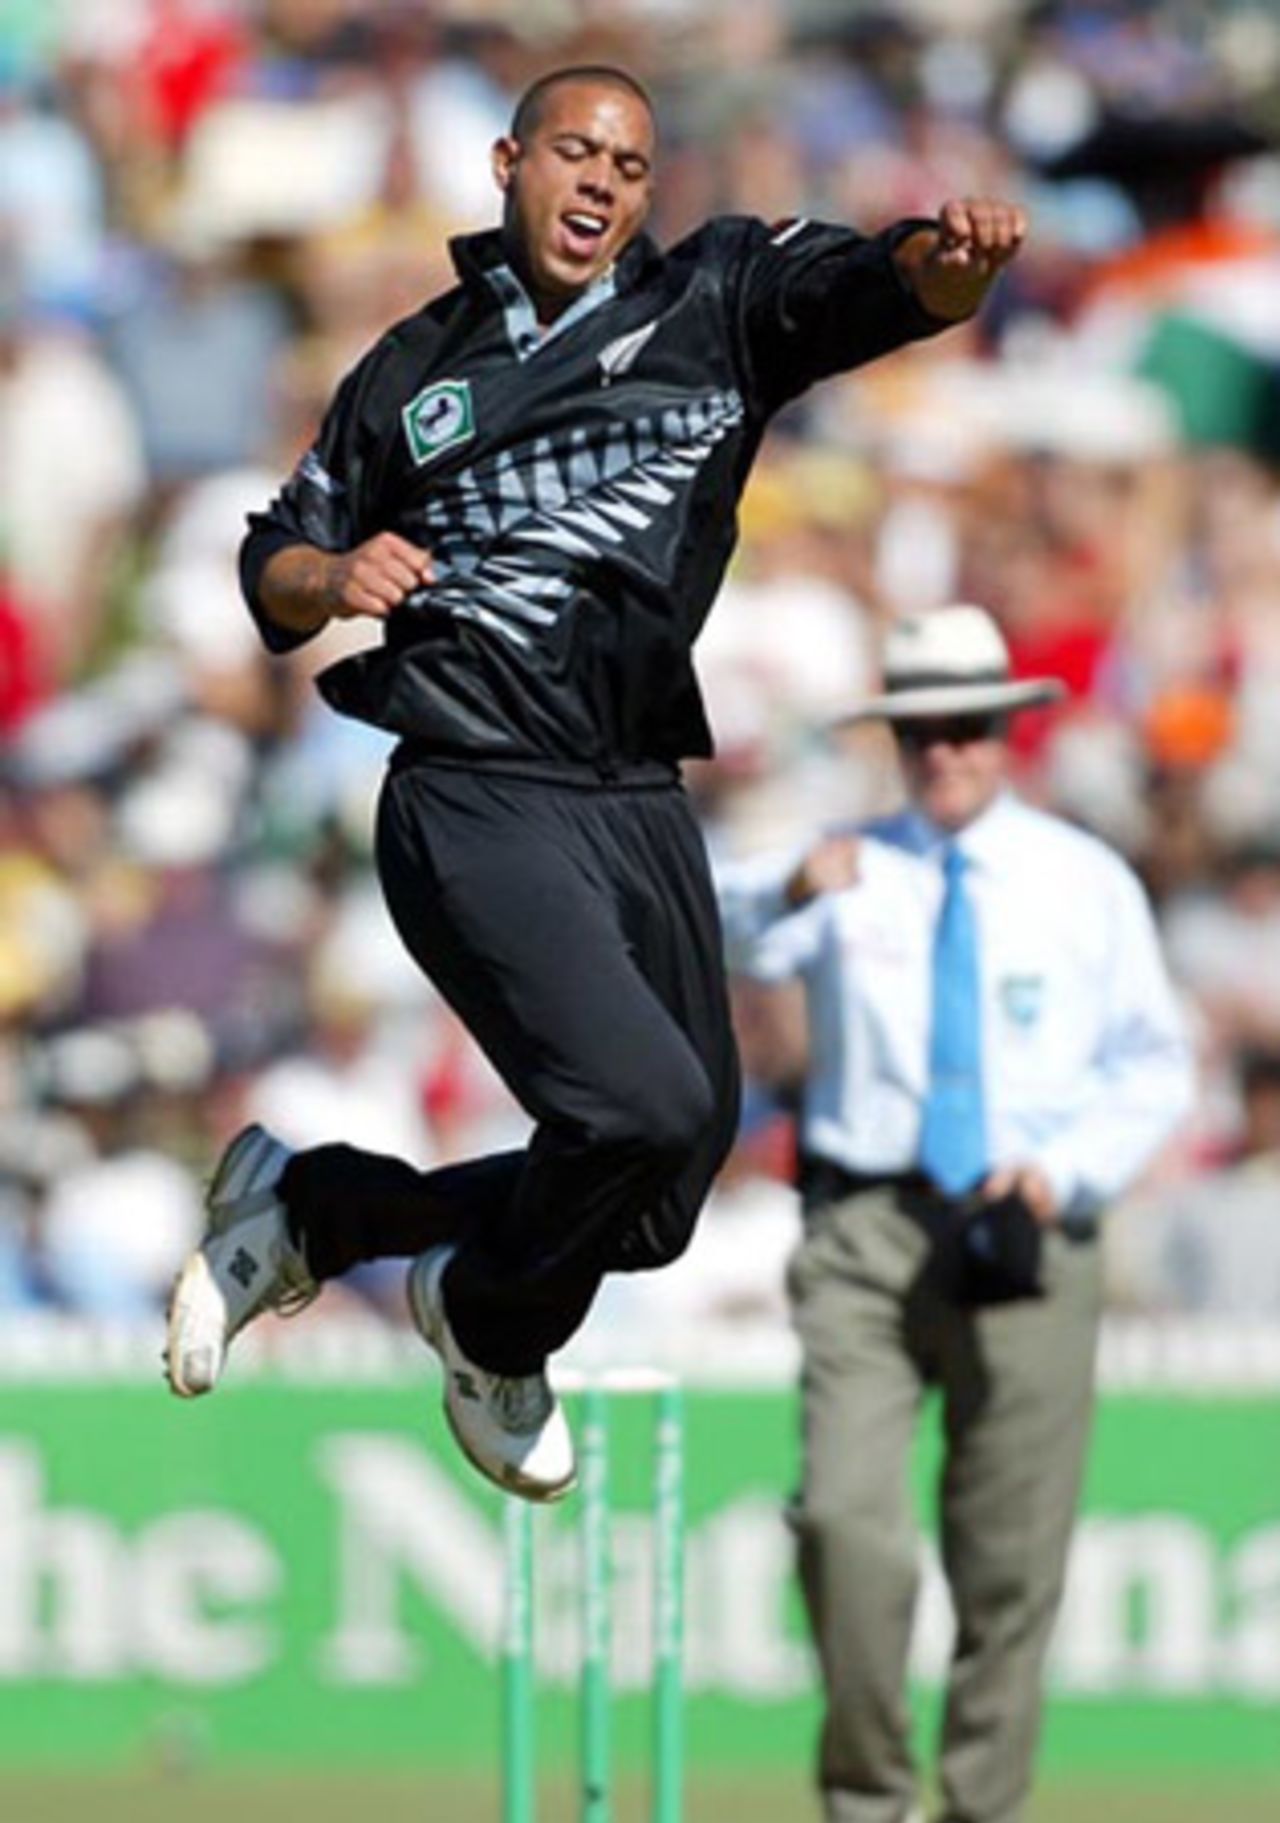 New Zealand bowler Andre Adams celebrates the dismissal of Indian batsman Javagal Srinath, lbw for 15 as umpire Doug Cowie raises his finger in the background. 7th ODI: New Zealand v India at Westpac Park, Hamilton, 14 January 2003.